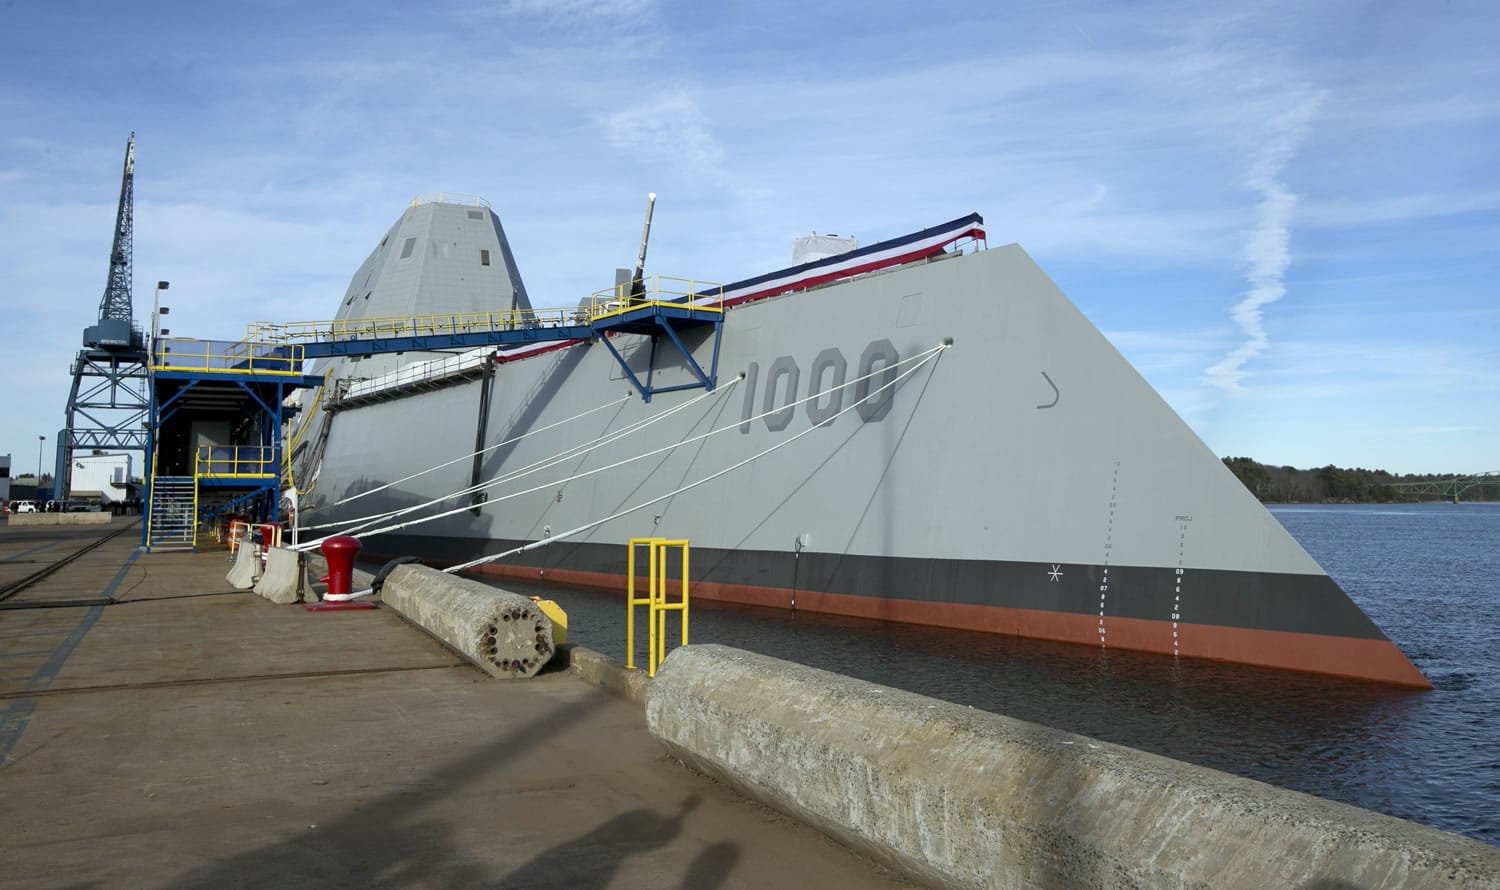 The Navy's stealthy Zumwalt destroyer is moored in Bath, Maine. The technology-laden Zumwalt taking shape at Bath Iron Works is unlike any other U.S.